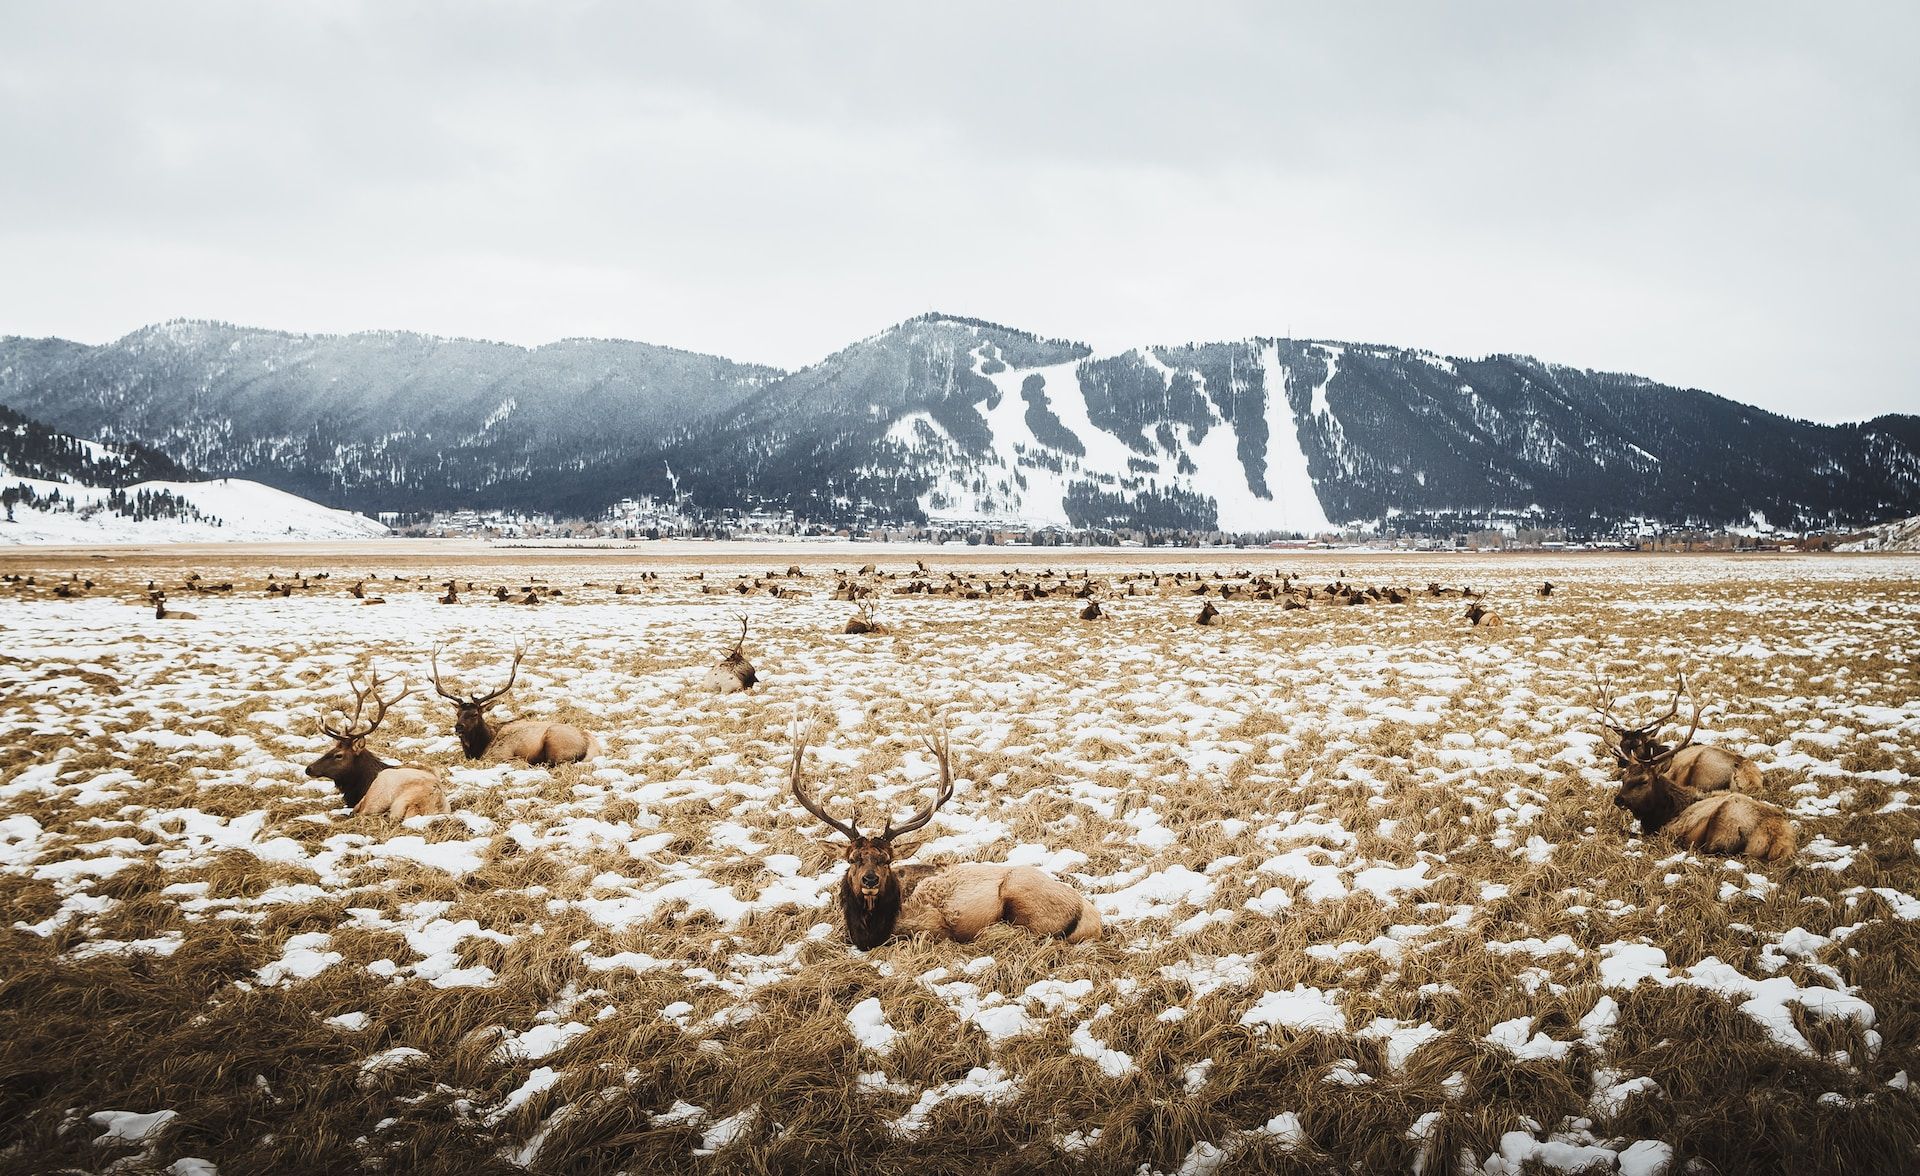 A herd of elk lounge in tall grasses and snow at the National Elk Refuge in Jackson, Wyoming